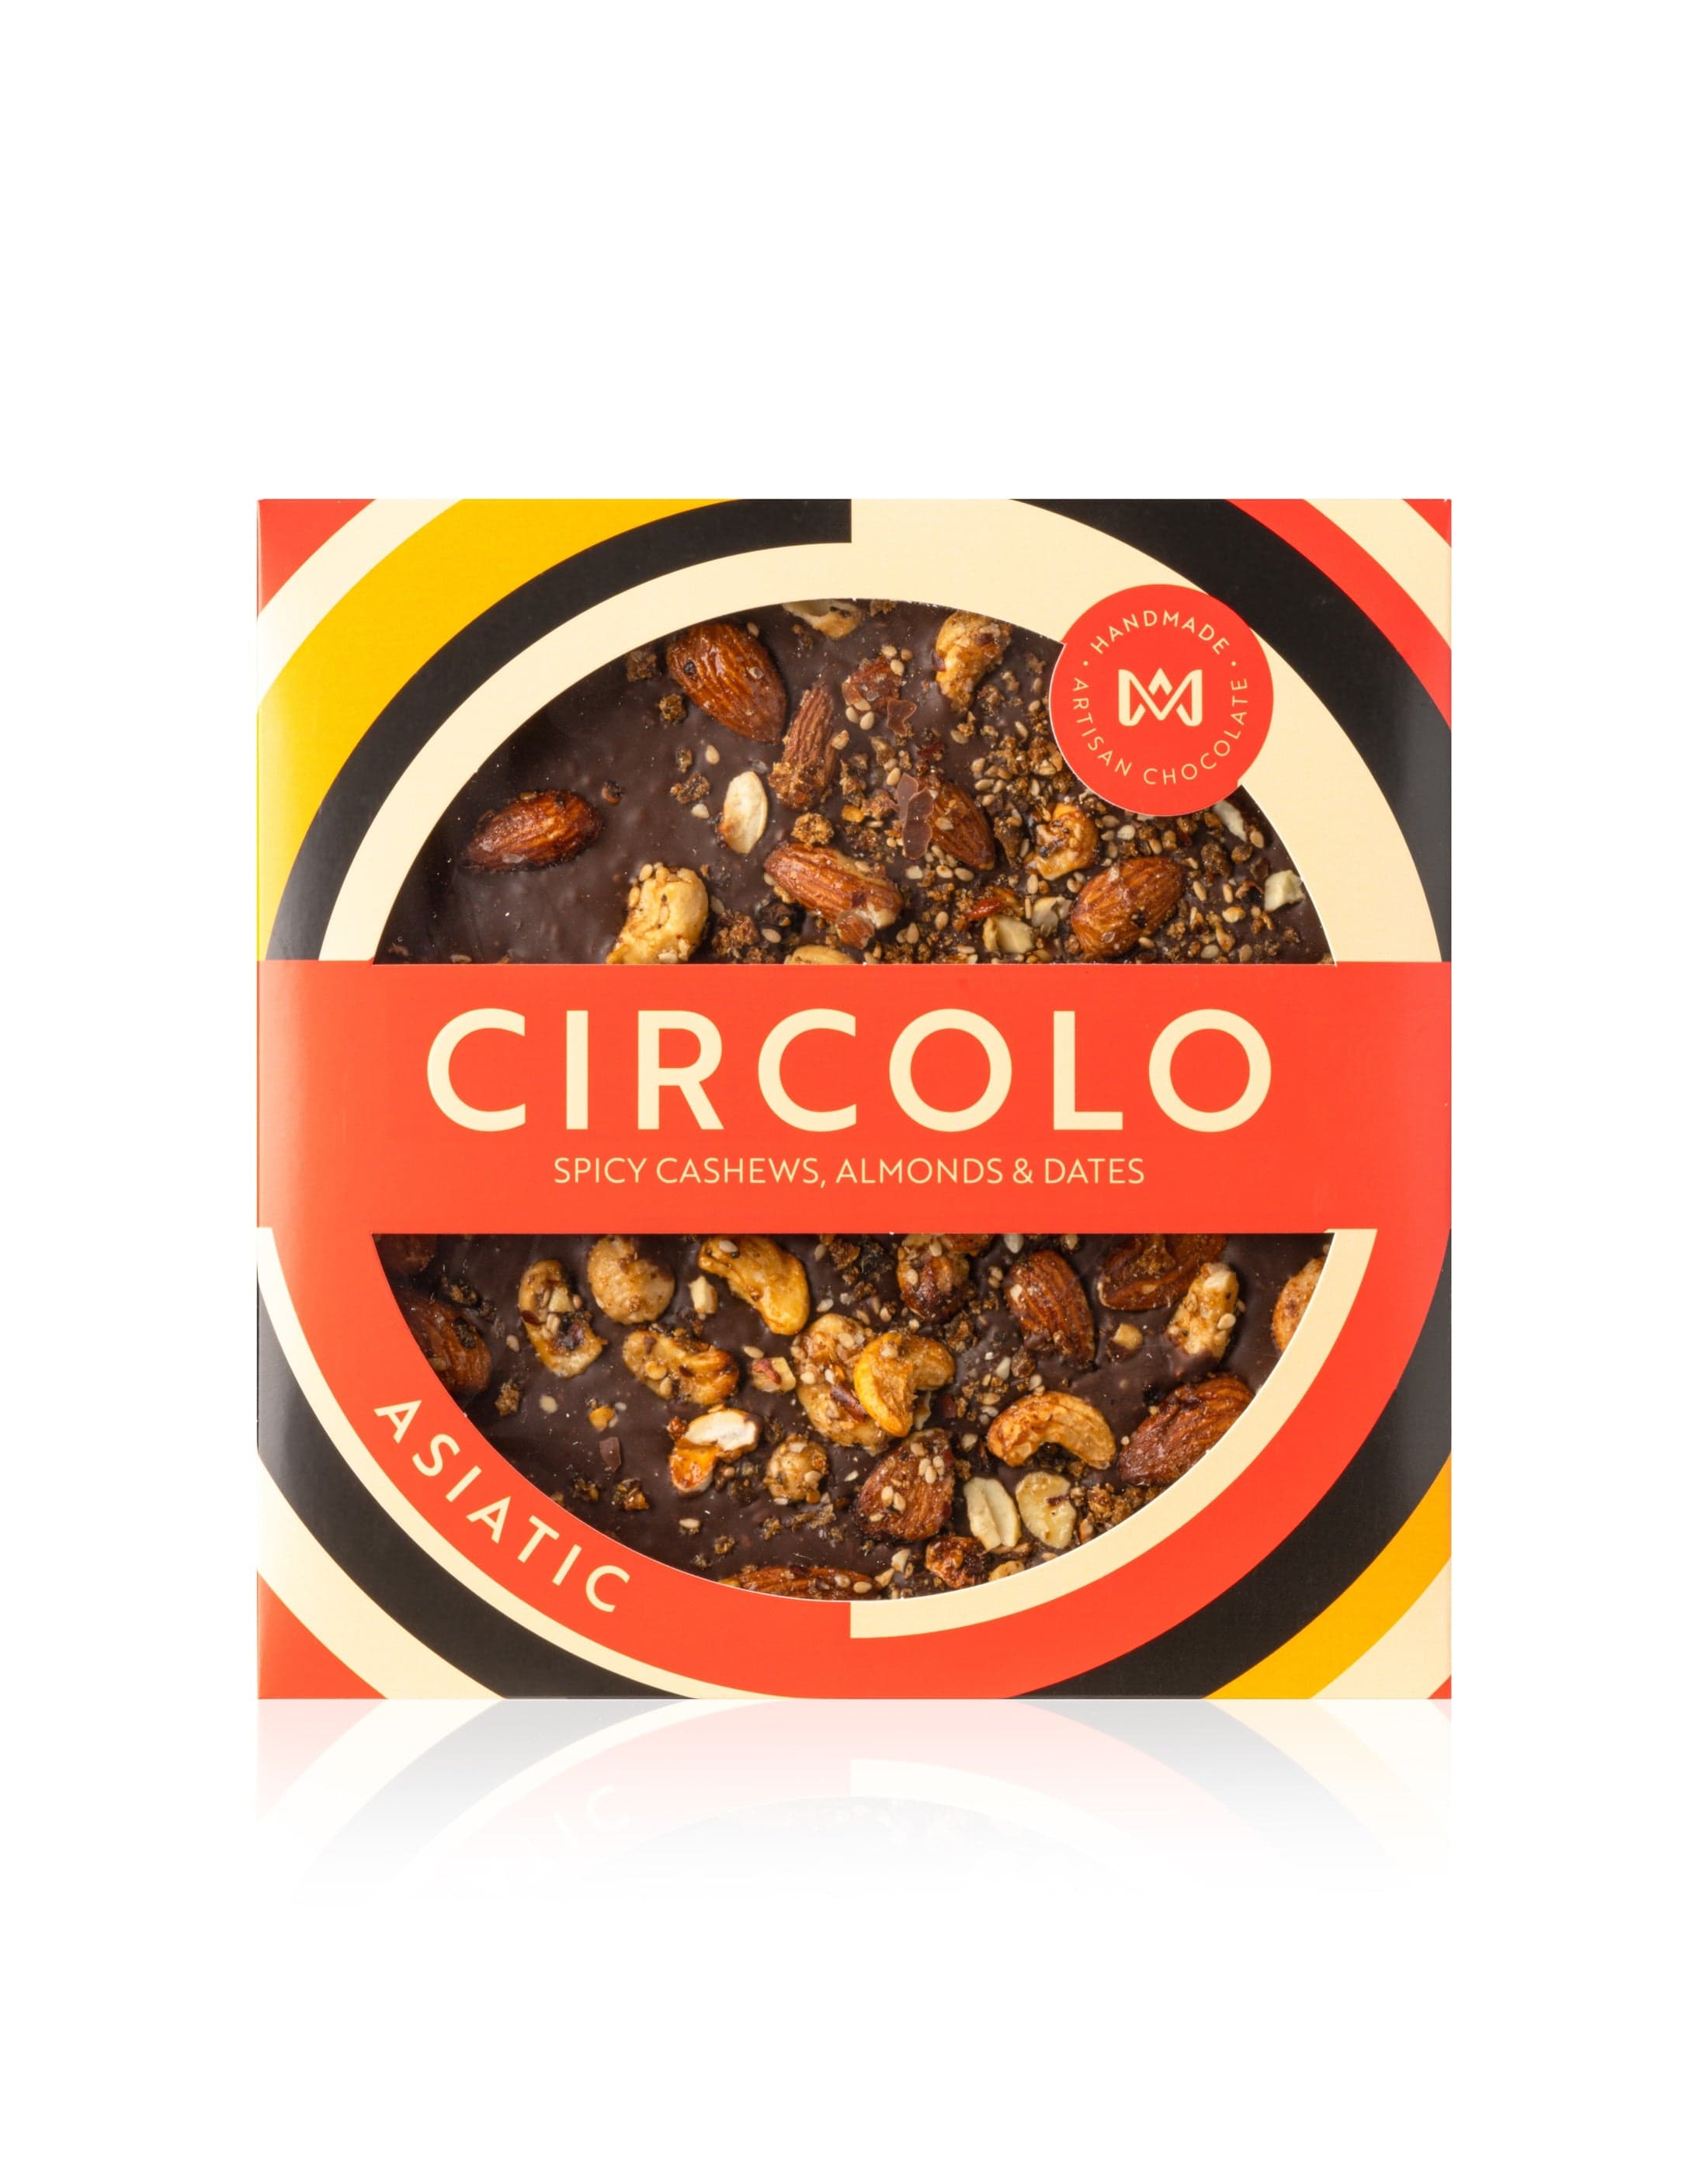 Circolo Asiatic - Handcrafted Confection - The Icelandic Store